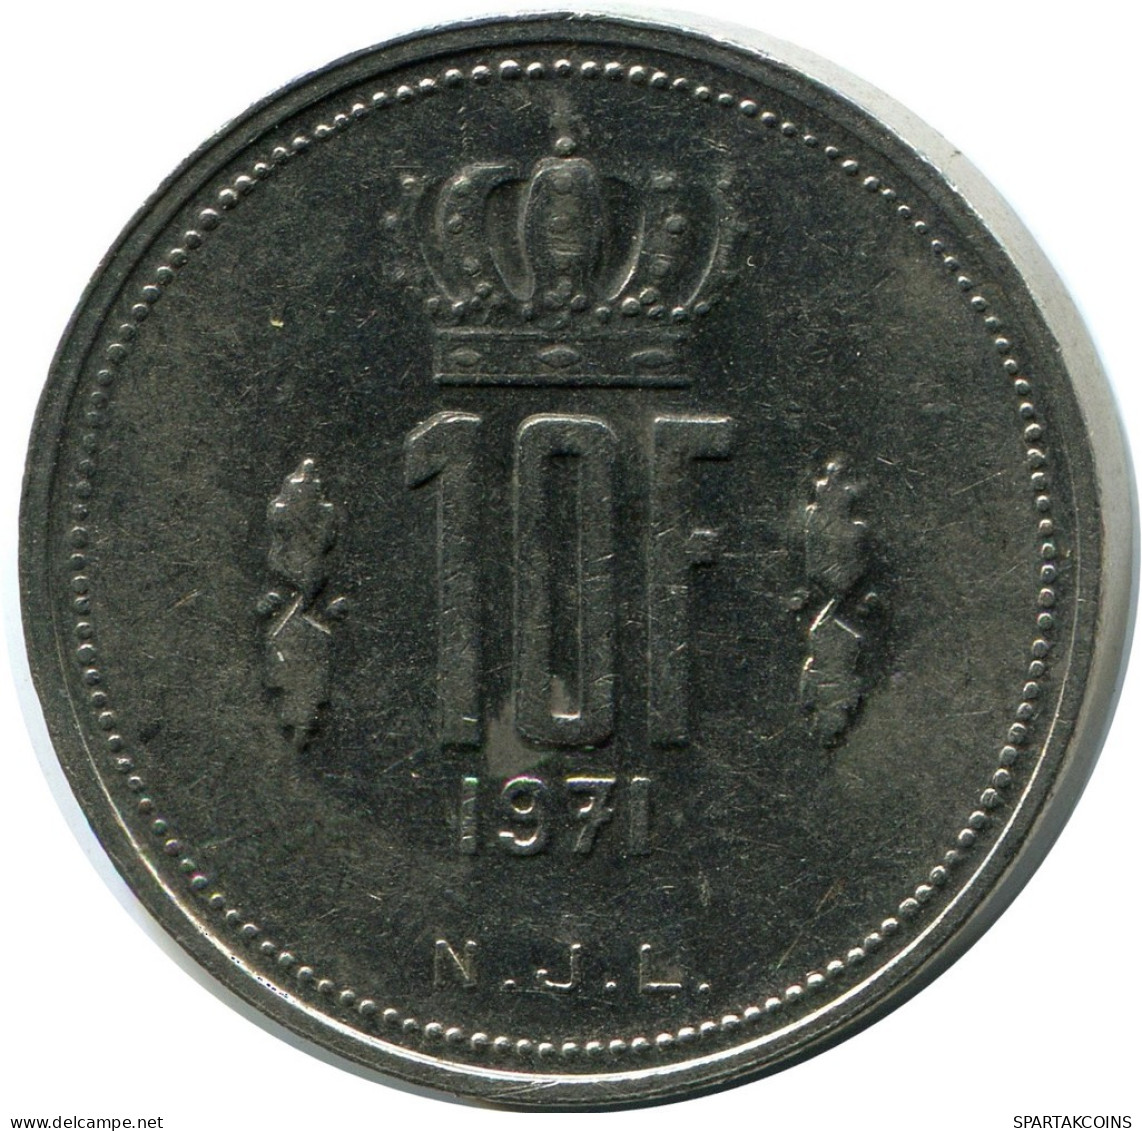 10 FRANCS 1971 LUXEMBOURG Coin #AZ418.U.A - Luxembourg